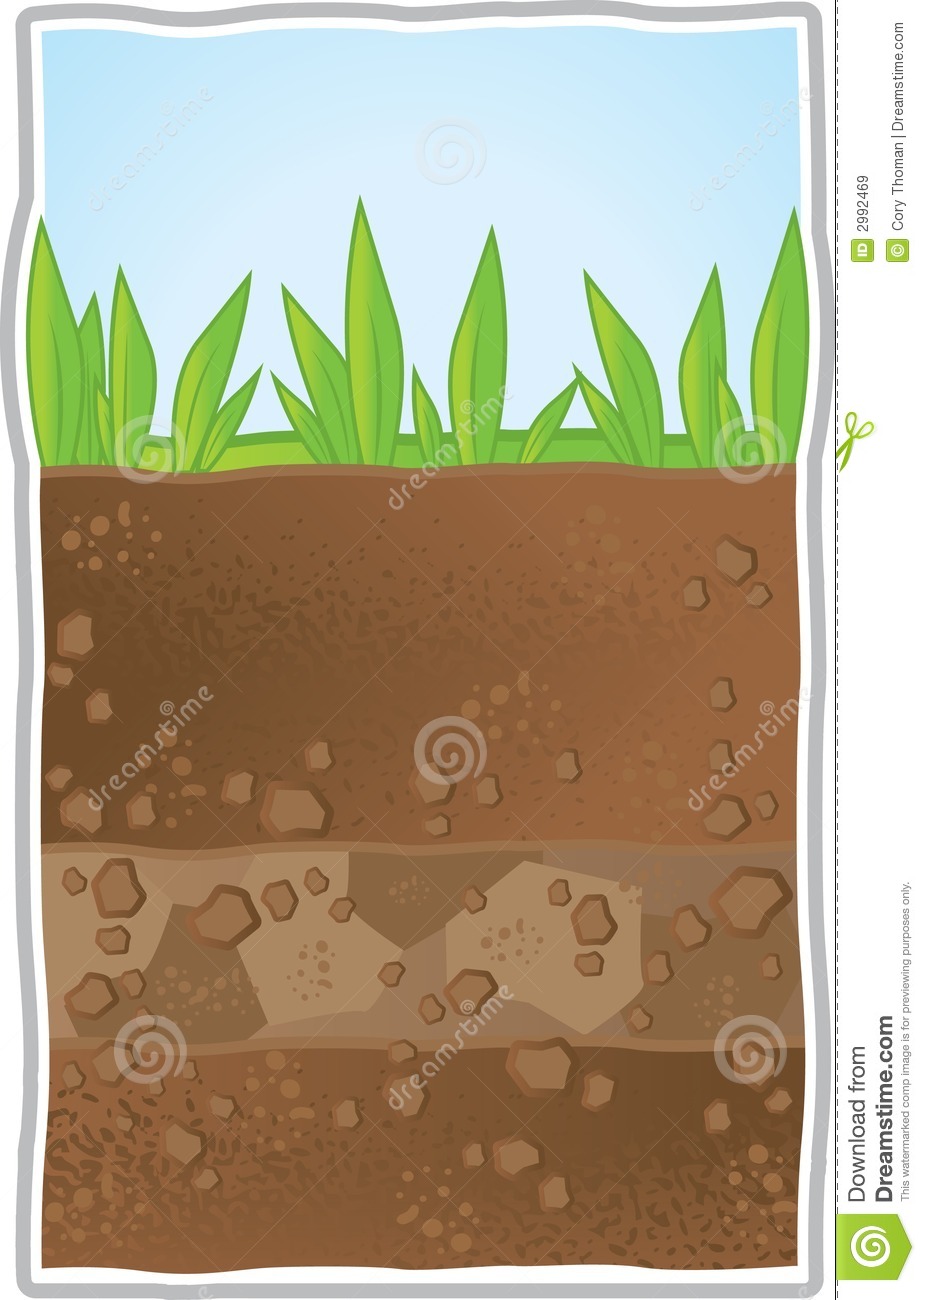 Soil Layers Clipart A Cross Section Of Layers Of